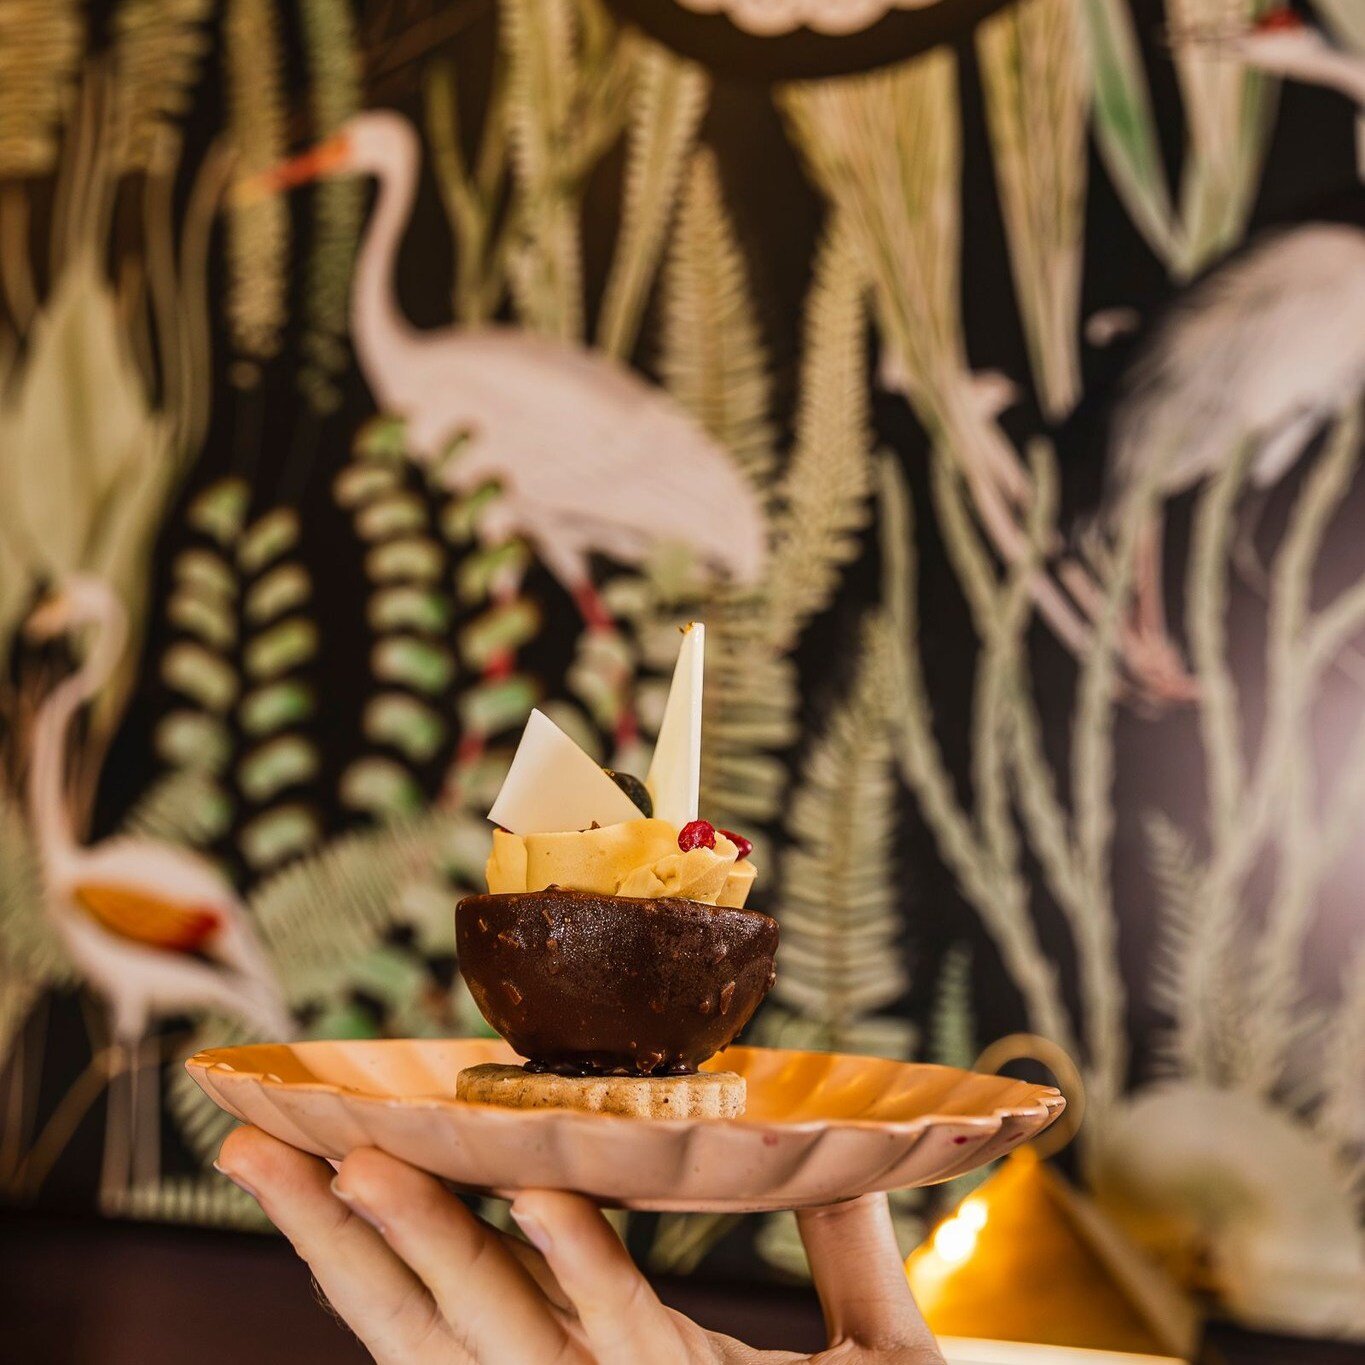 The weekend calls for something from our cabinet! Unable to choose? We recommend our rich Chocolate Bavarois... or getting a box of treats to go! 🍫#ChouchouBySofitel
.
.
.
.
#foodphotography #photography #inthekitchen #feedfeed #brisbaneeats #food #